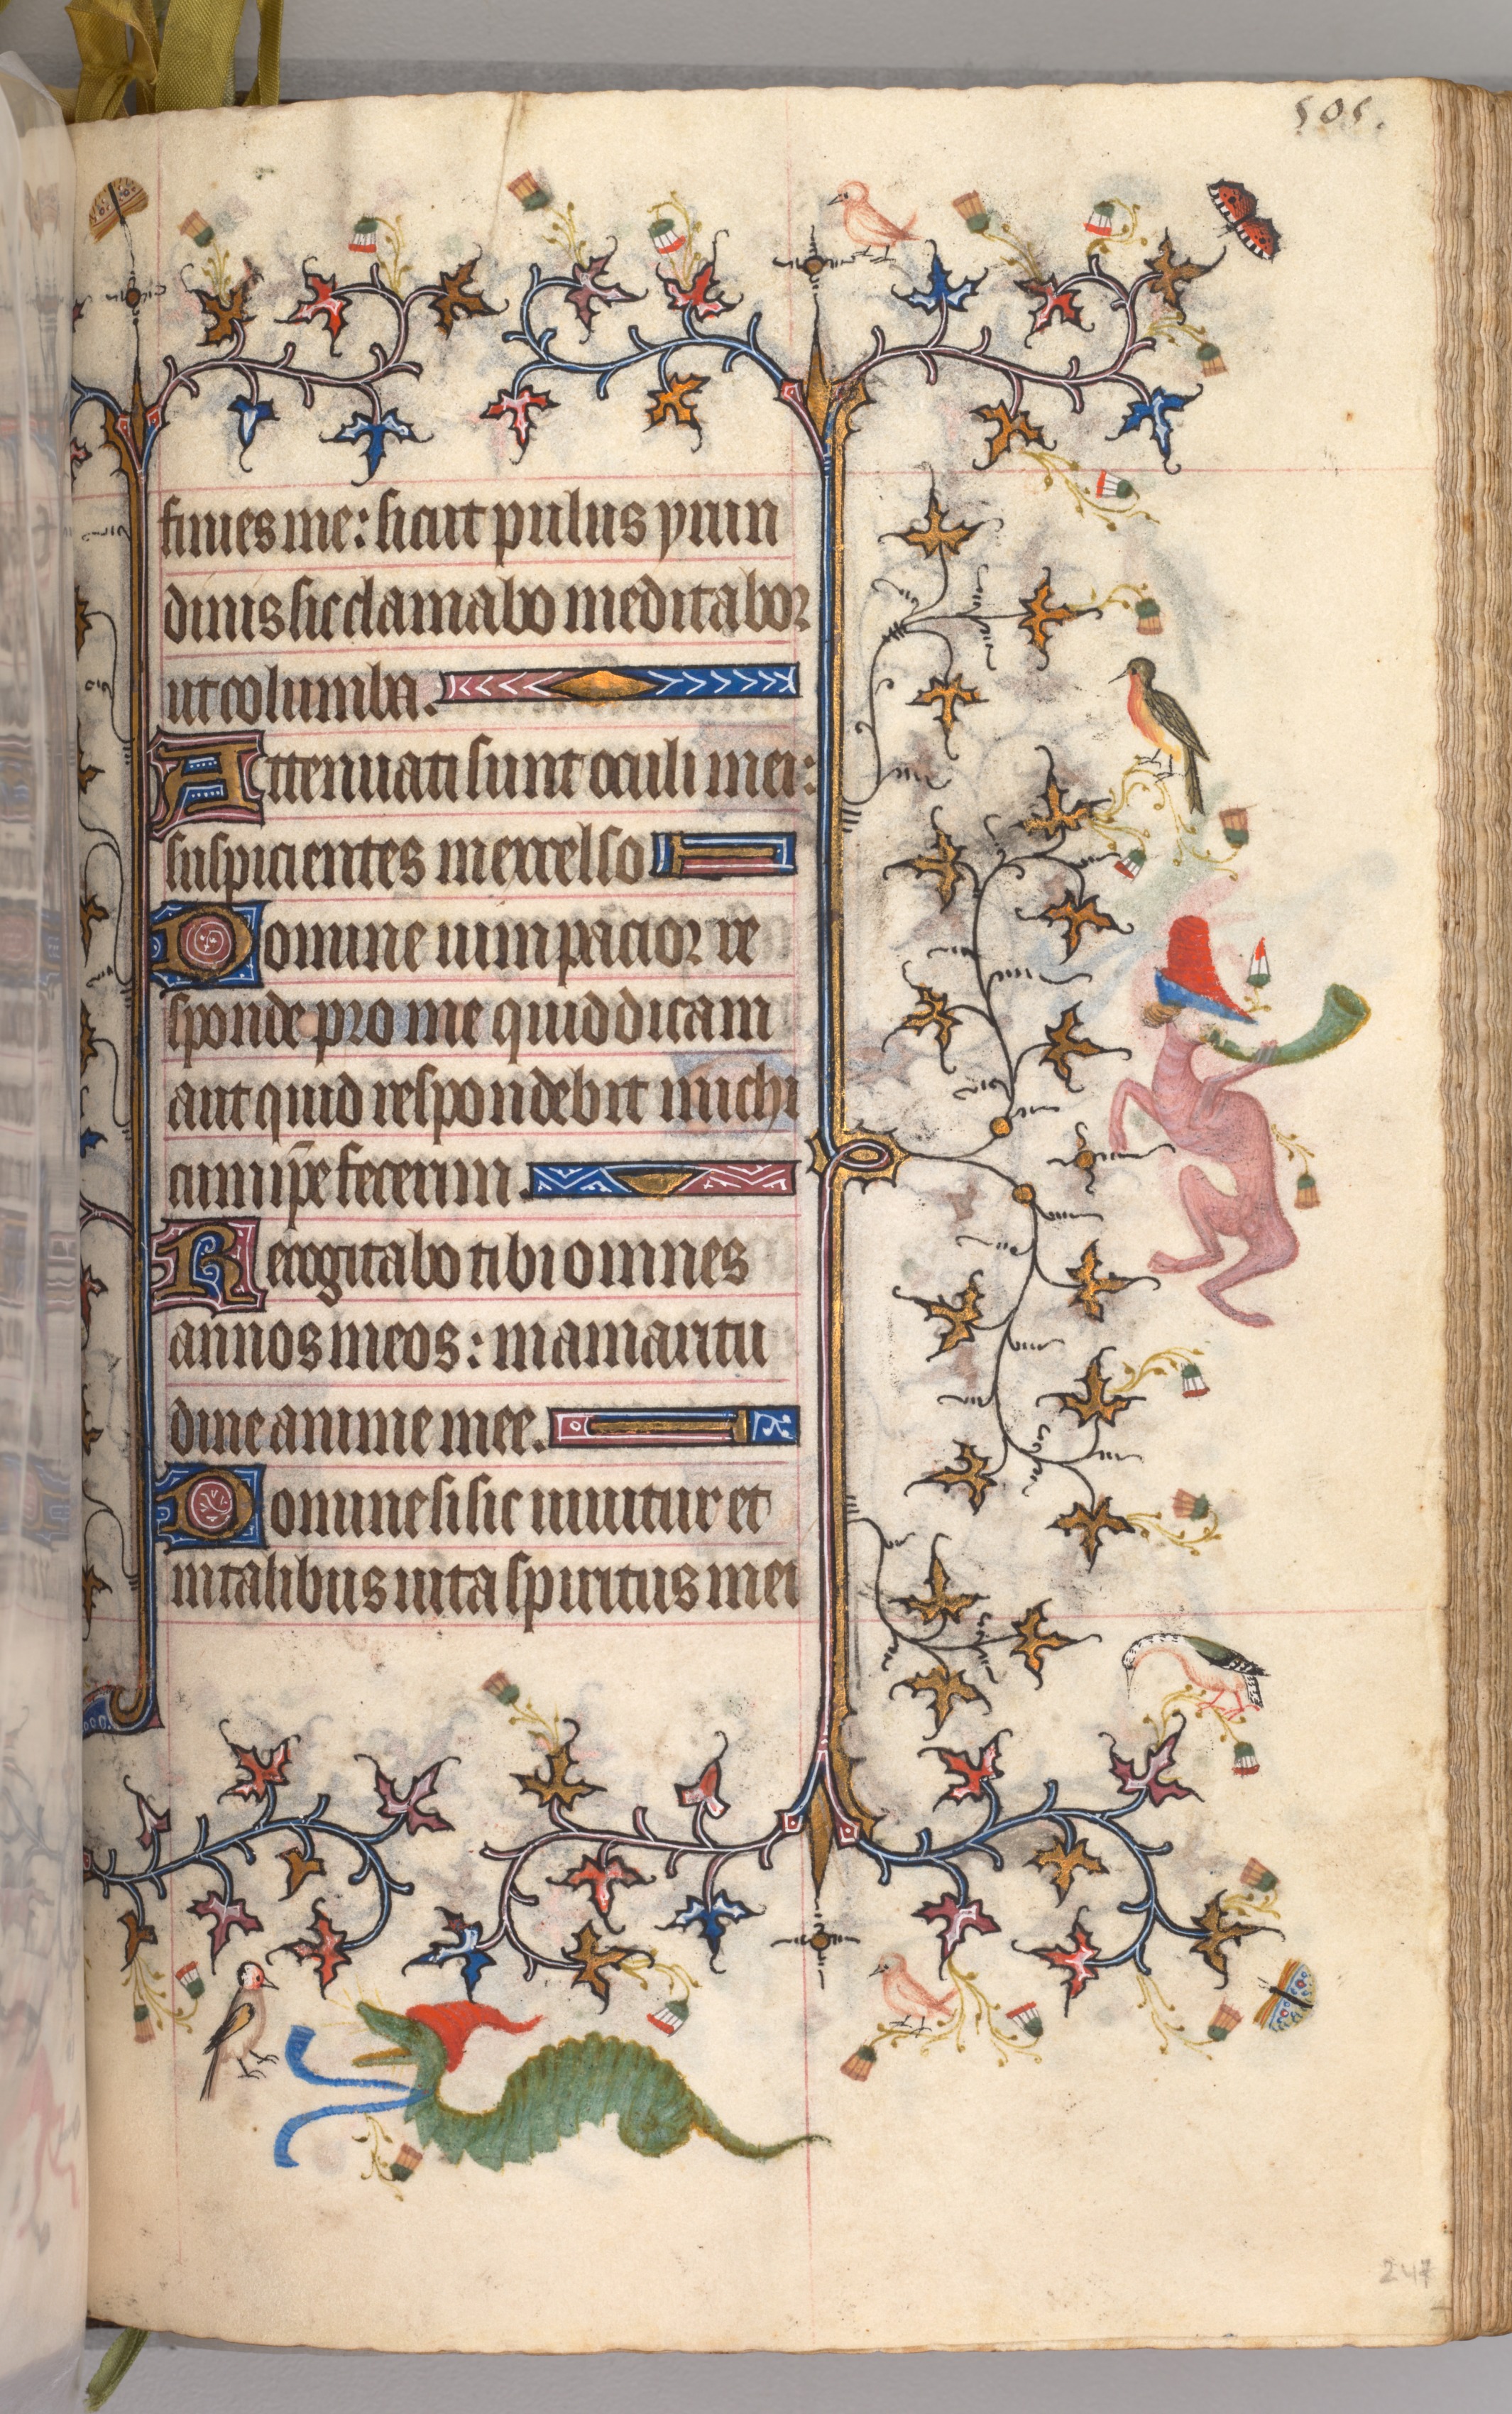 Hours of Charles the Noble, King of Navarre (1361-1425): fol. 247r, Text